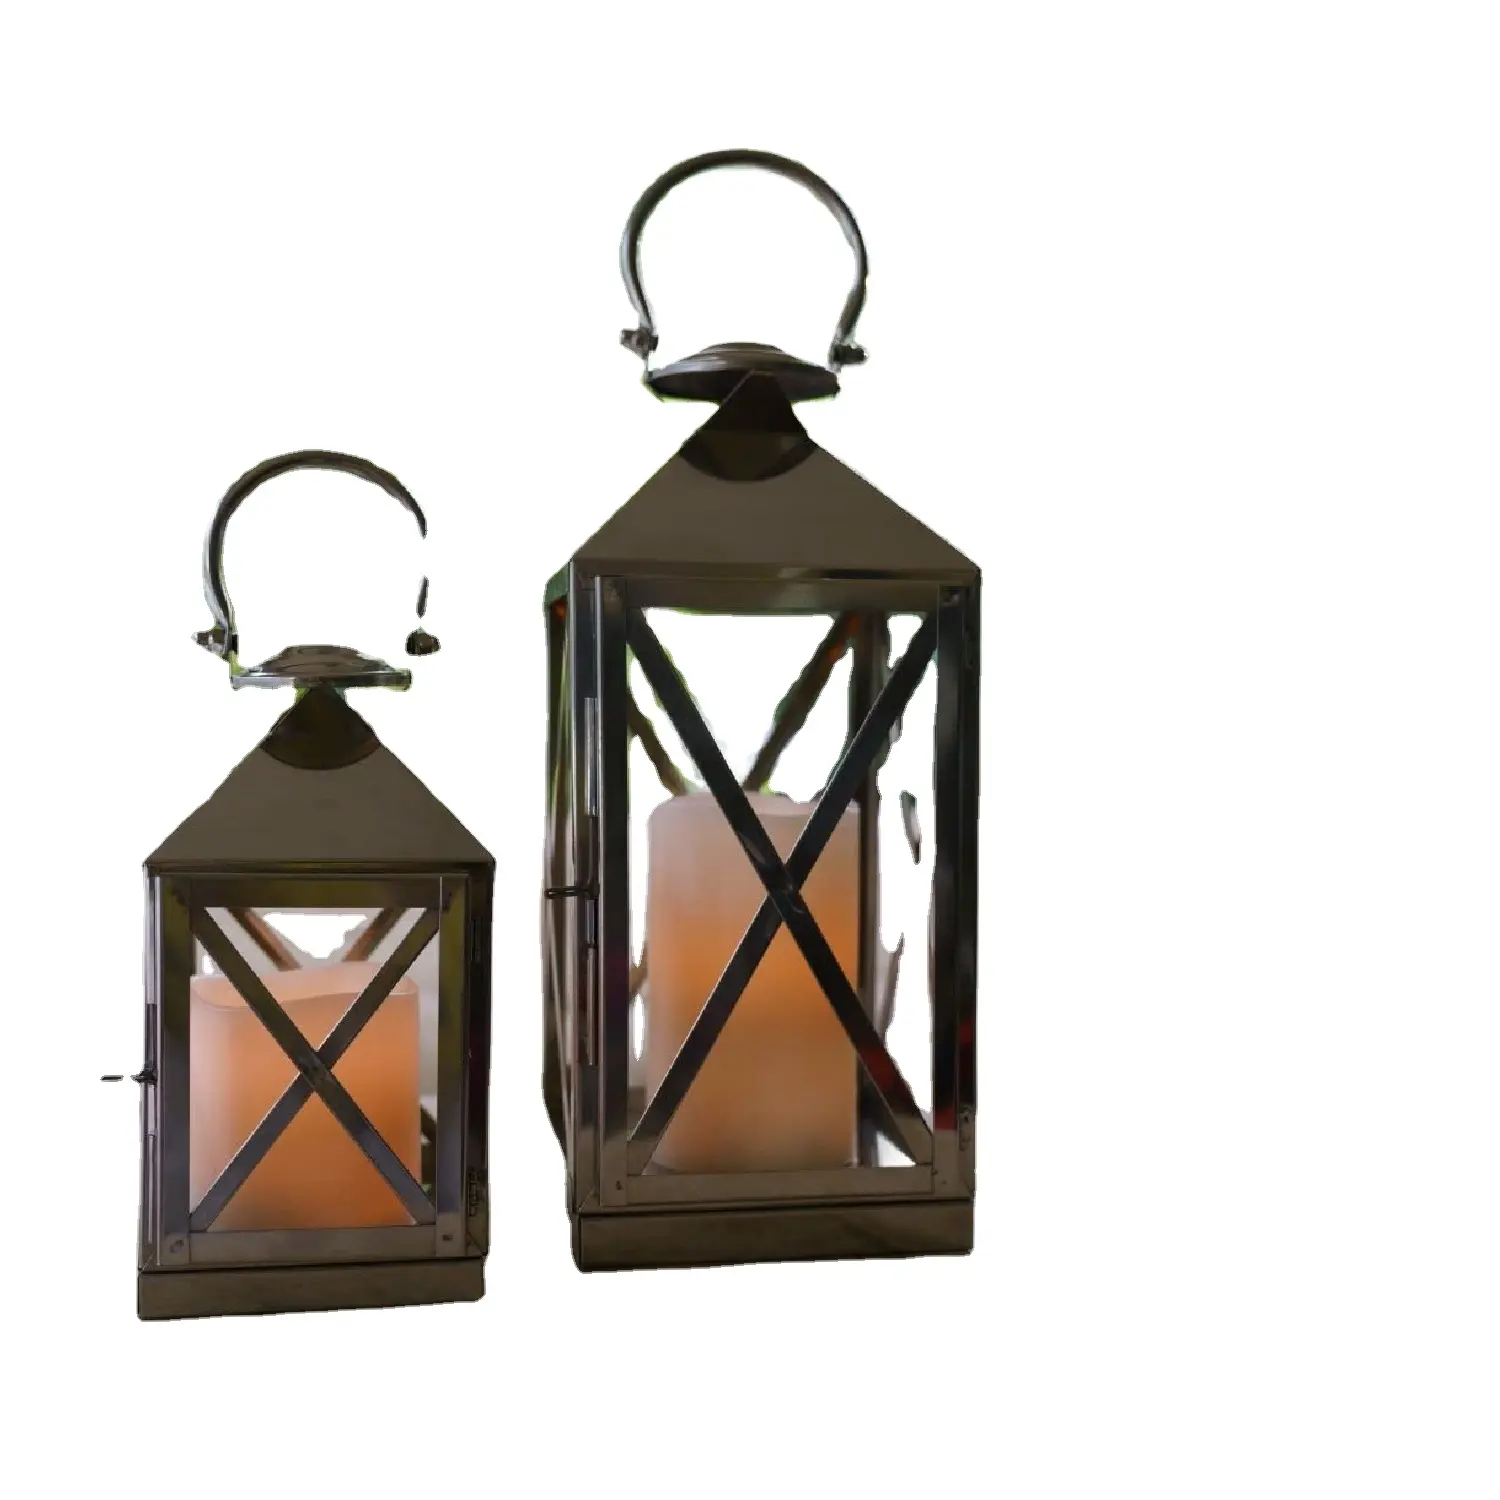 Set Of 2 Metal & Glass Candle Lantern With Black Powder Coating Finishing And Square Shape Excellent Quality For Home Decoration